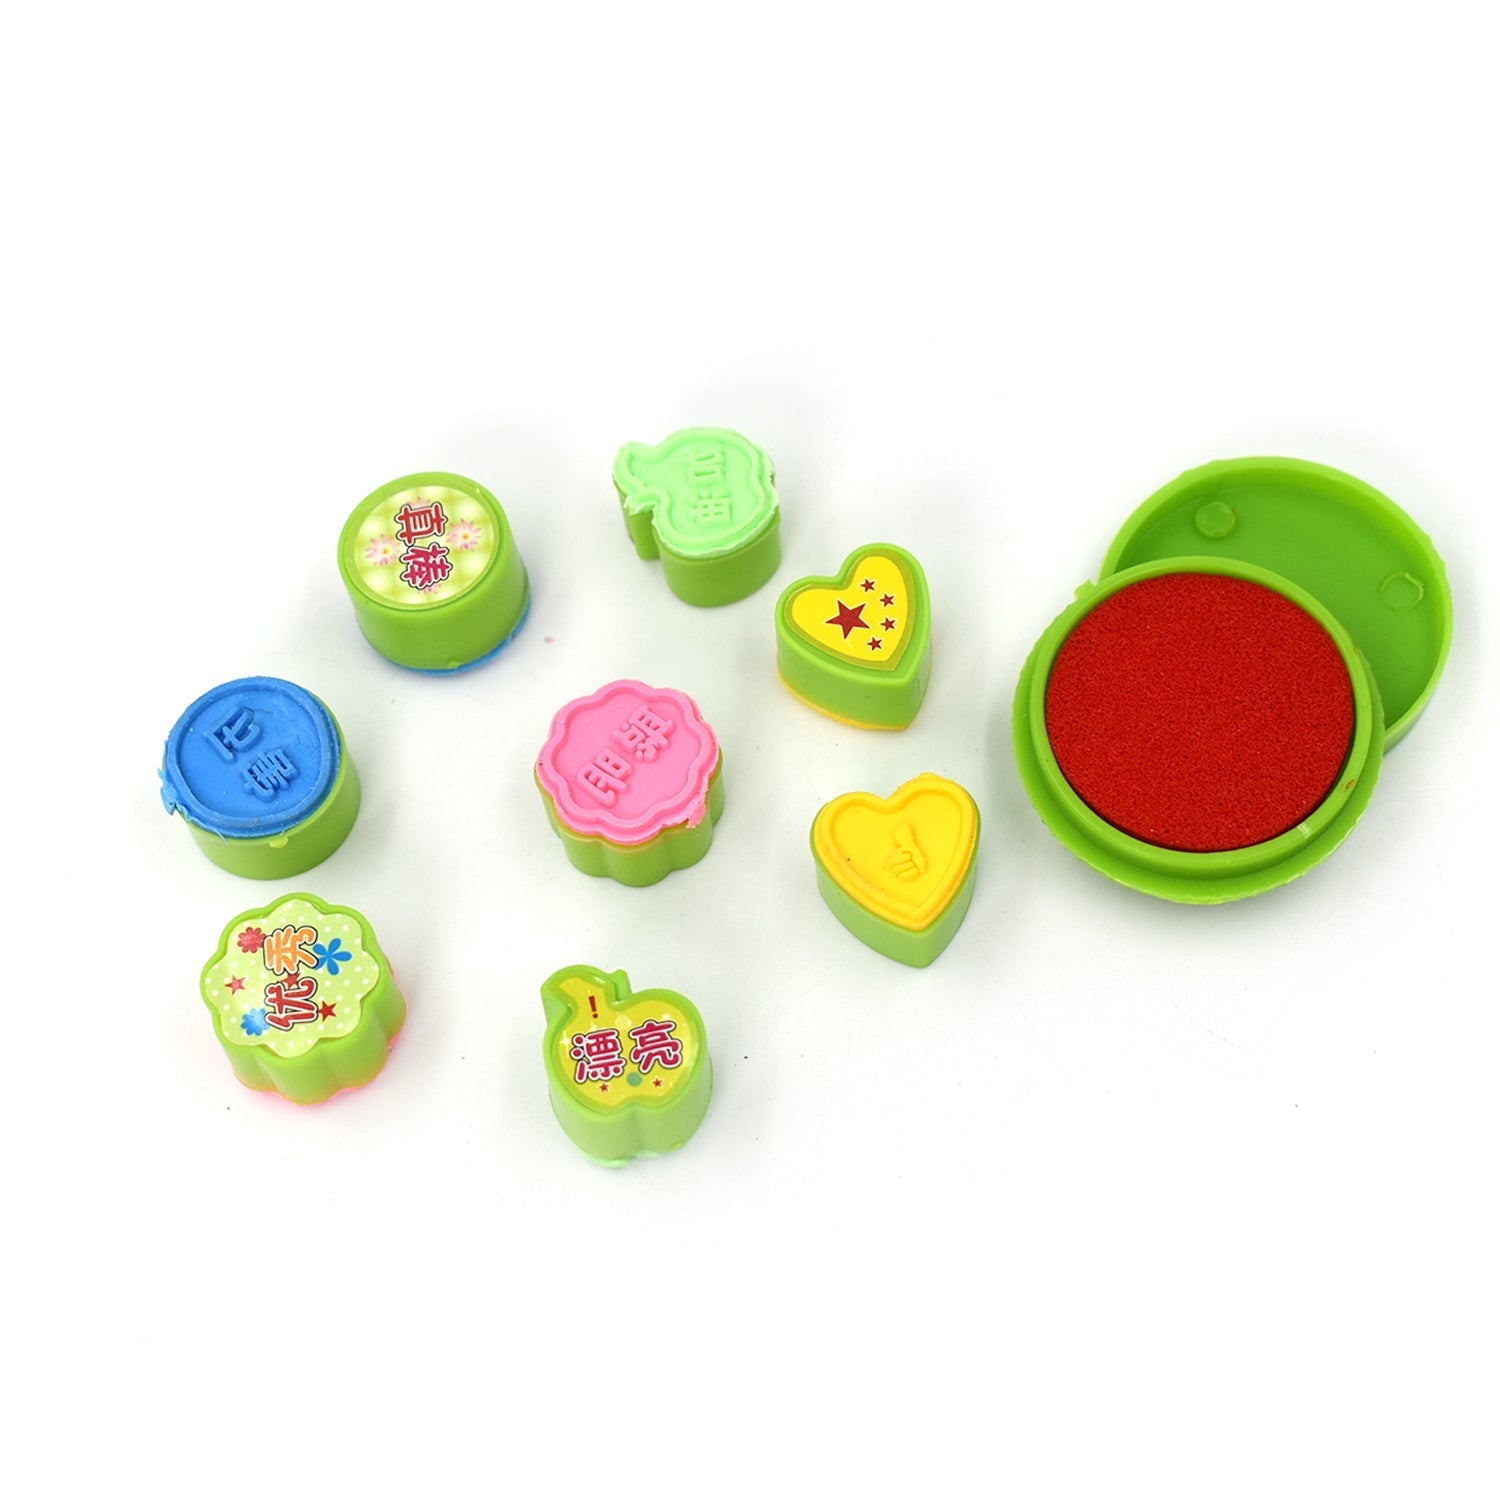 4806 9 Pc Stamp Set used in all types of household places by kids and children’s for playing purposes. DeoDap